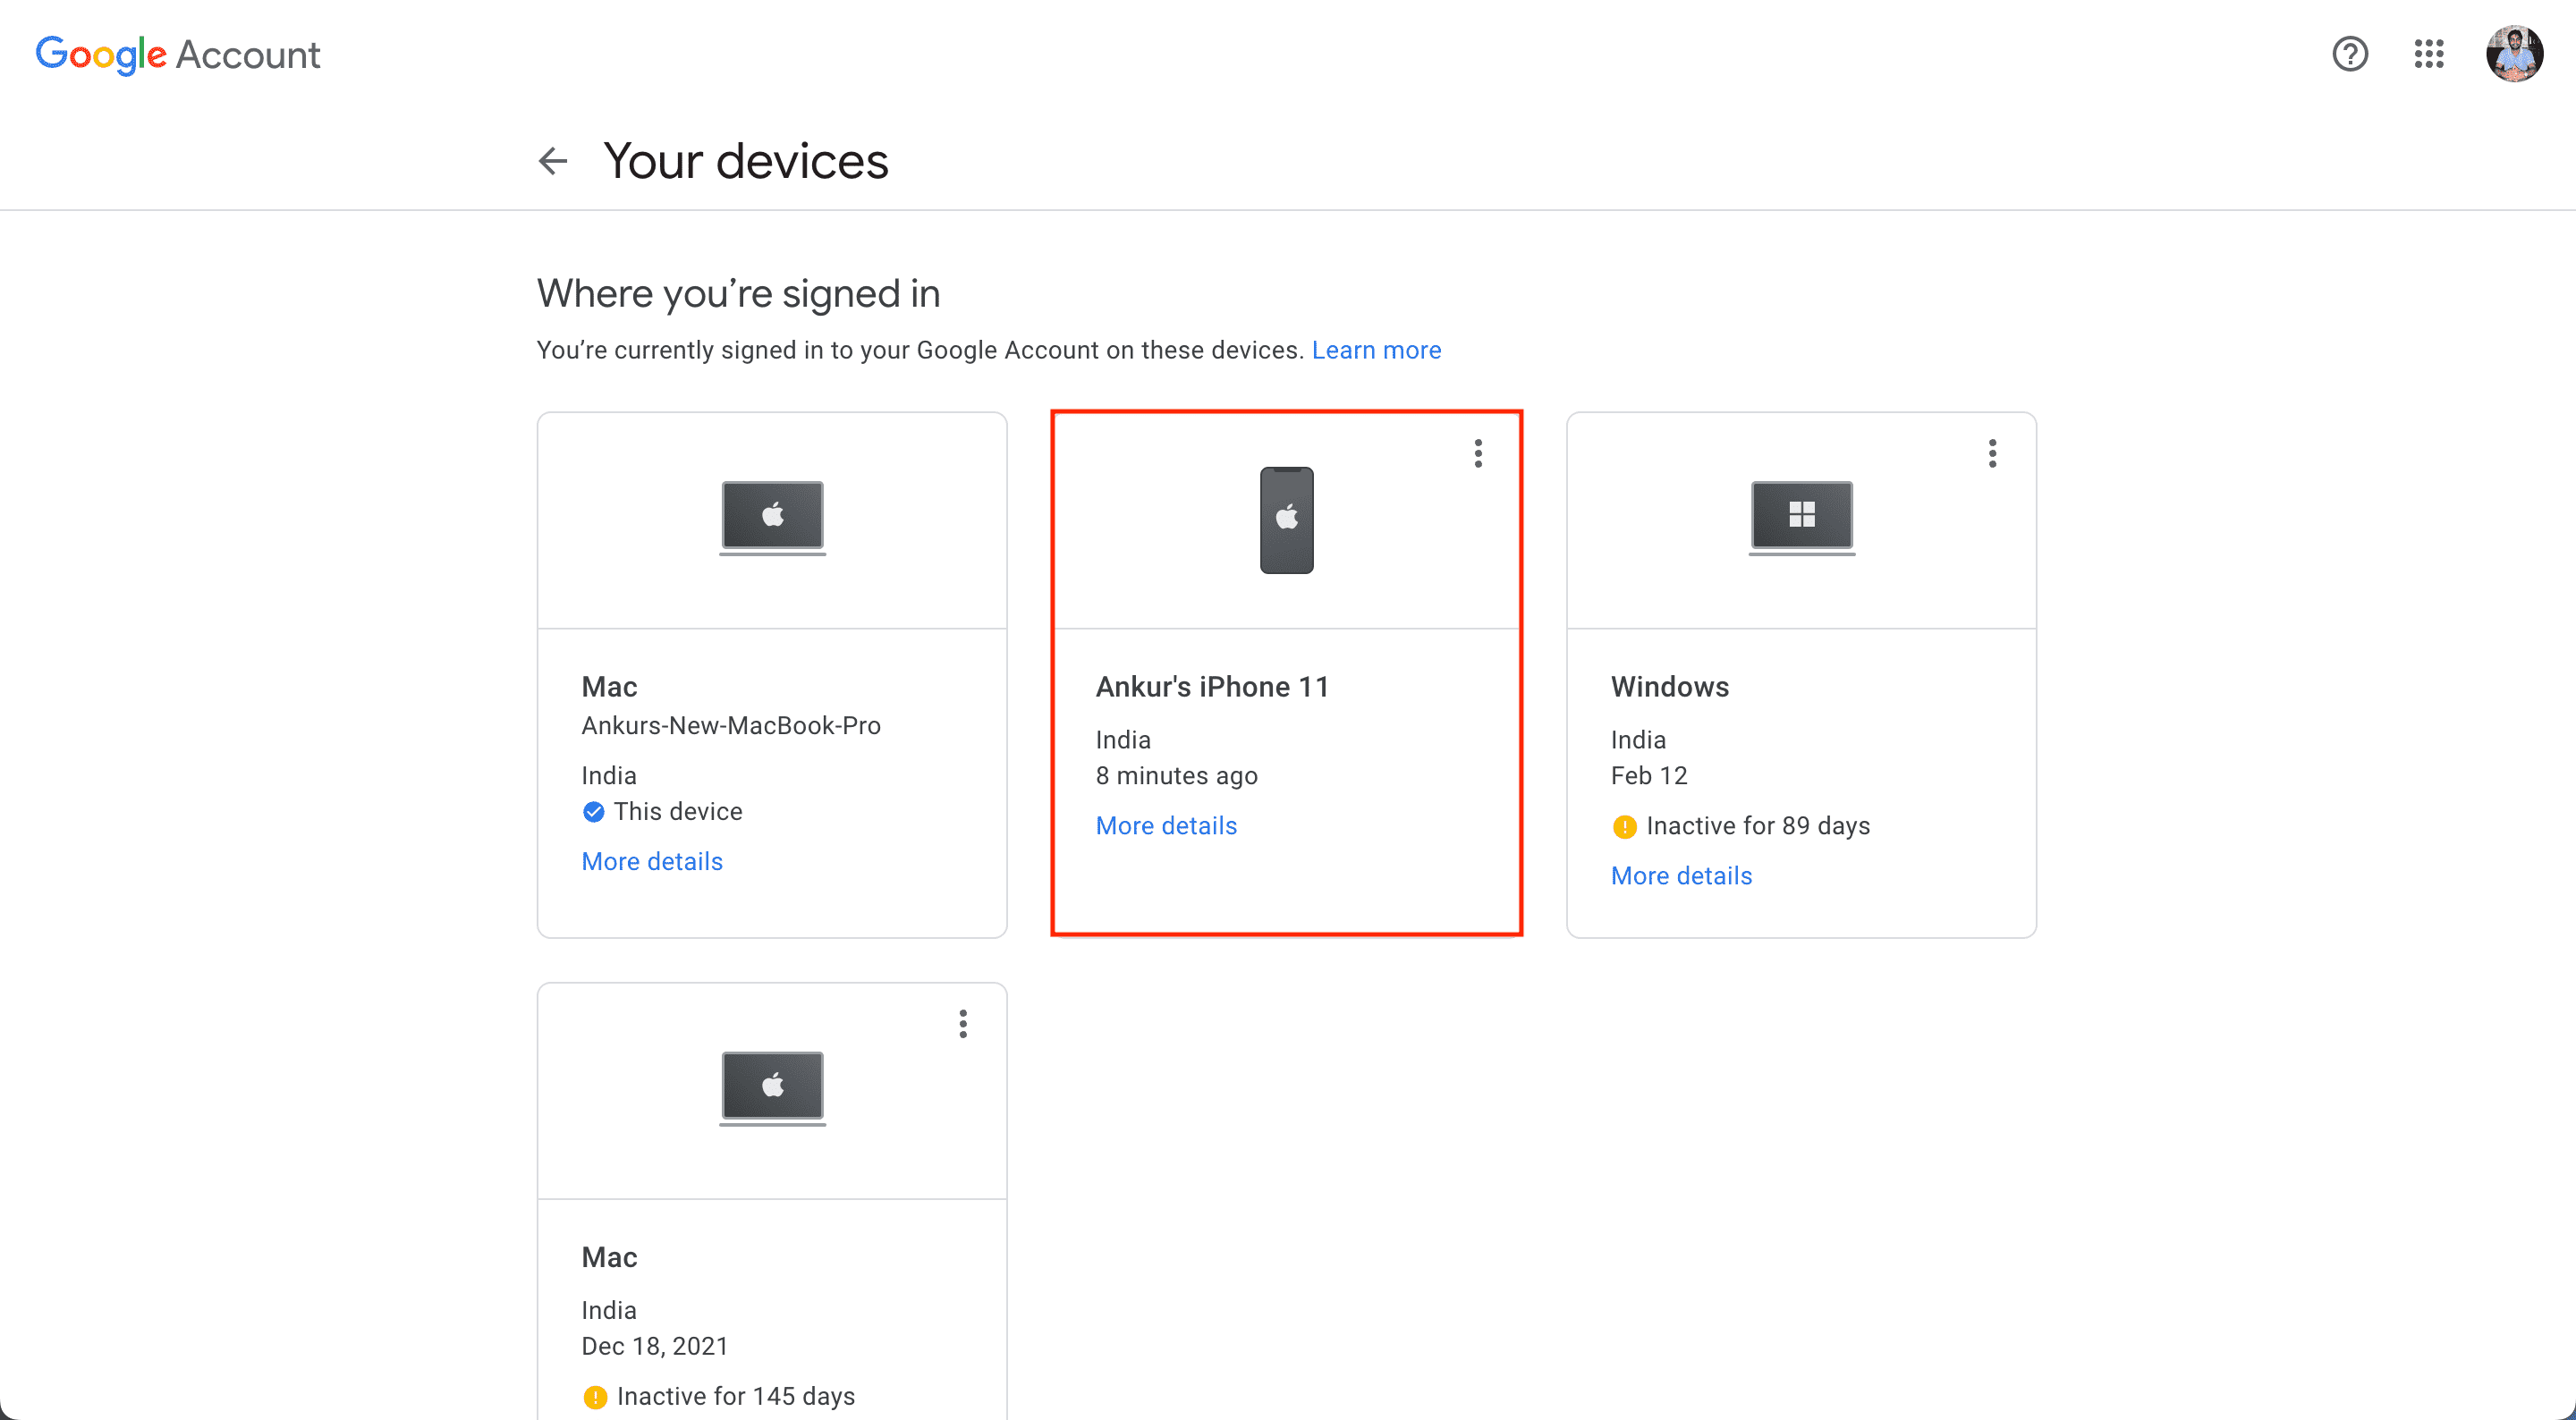 Devices where you're signed in to your Google account